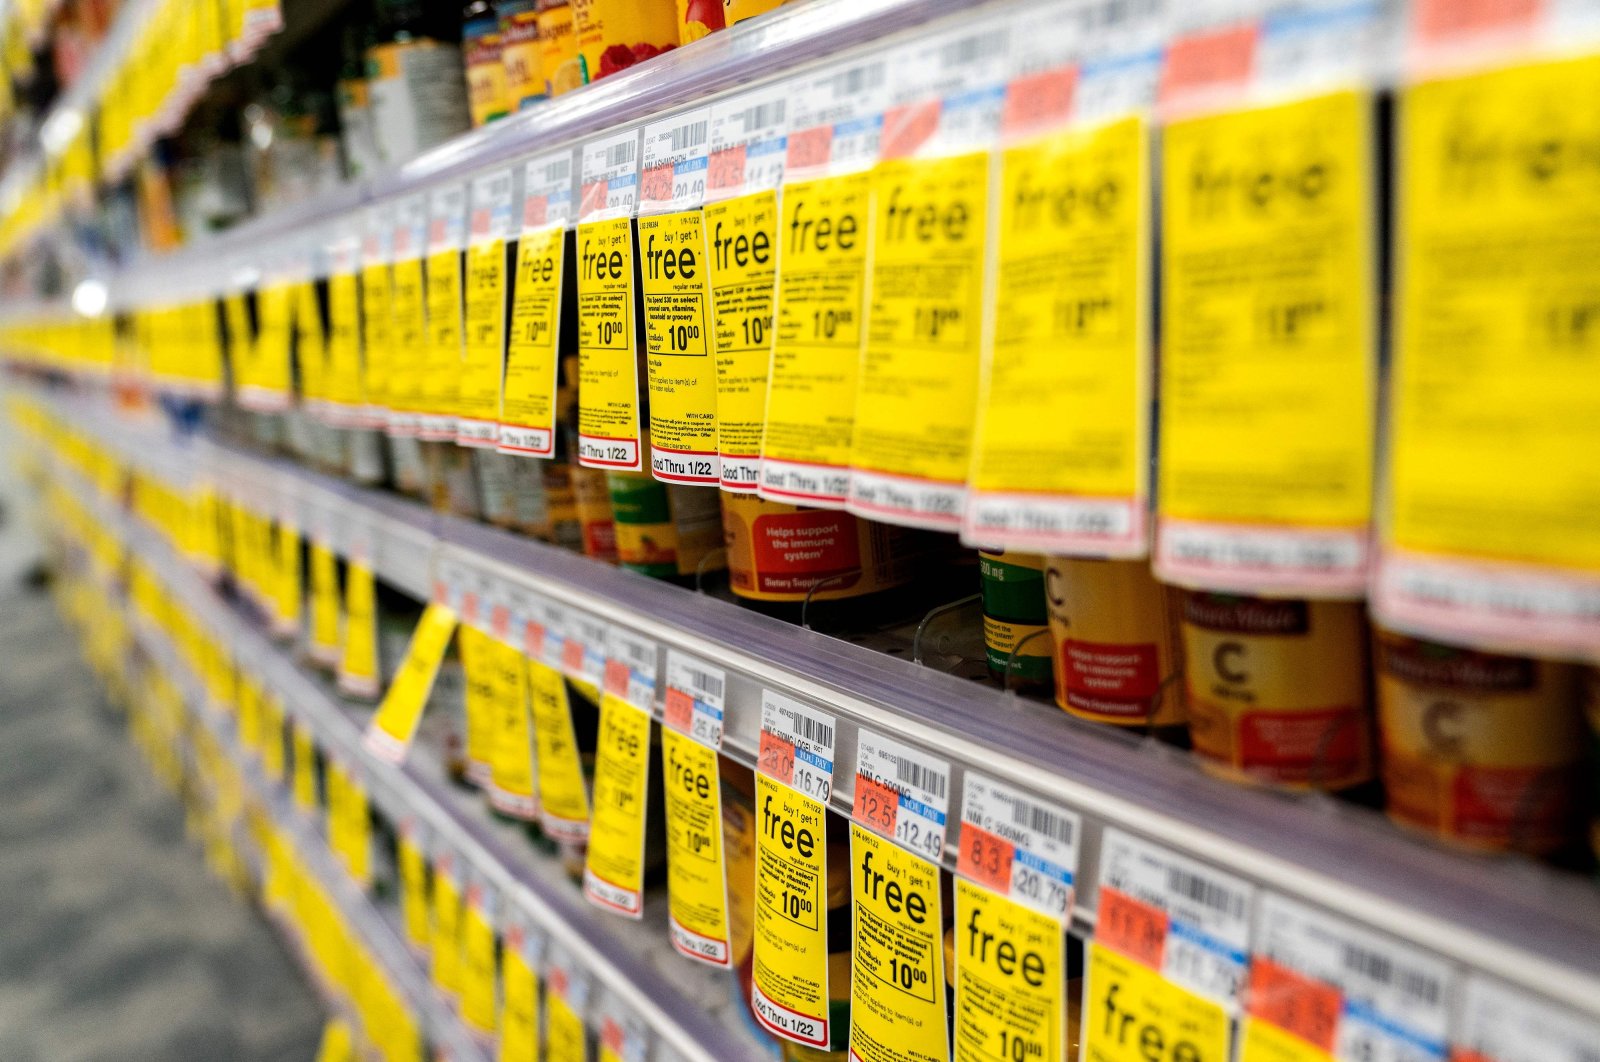 Sale stickers are displayed on shelves at a supermarket in Washington, DC., U.S, Jan. 12, 2022. (AFP Photo)